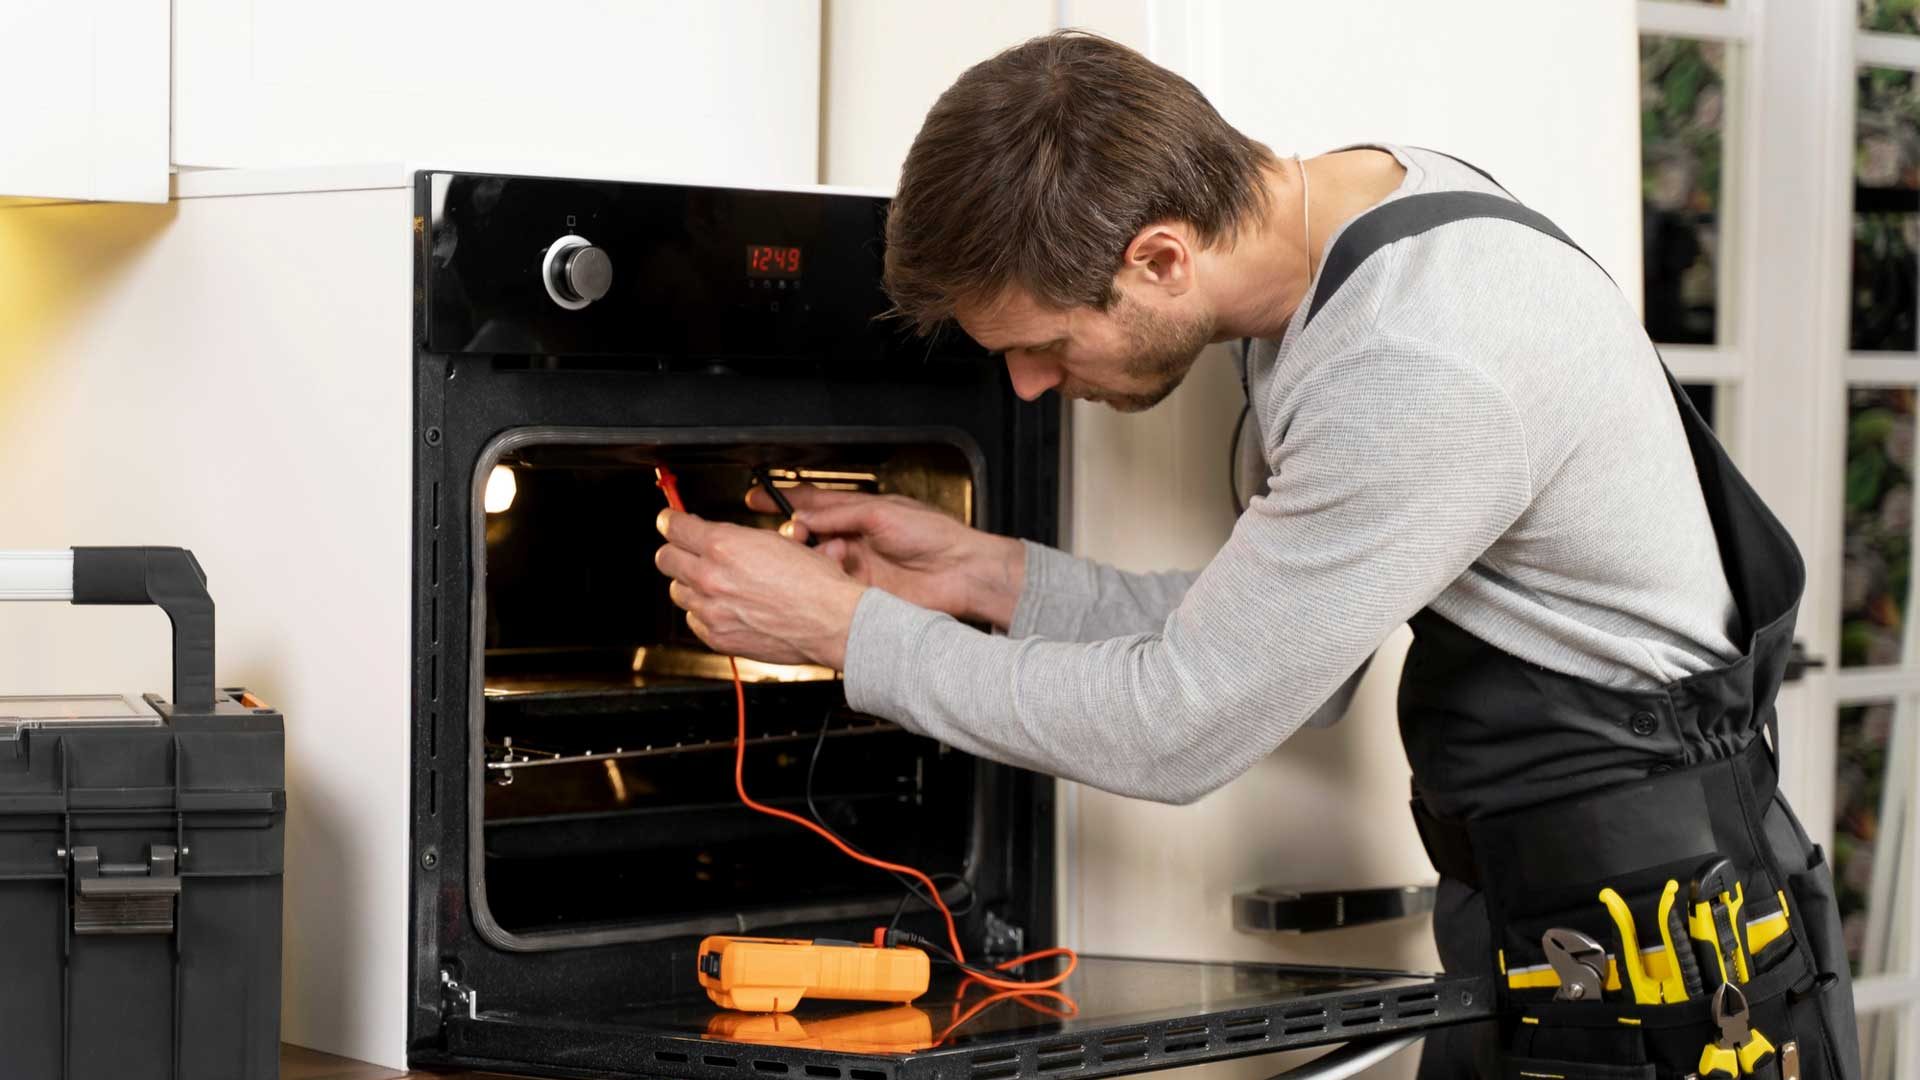 We Offer The Best <span class="heading">Appliance Repair Services</span>